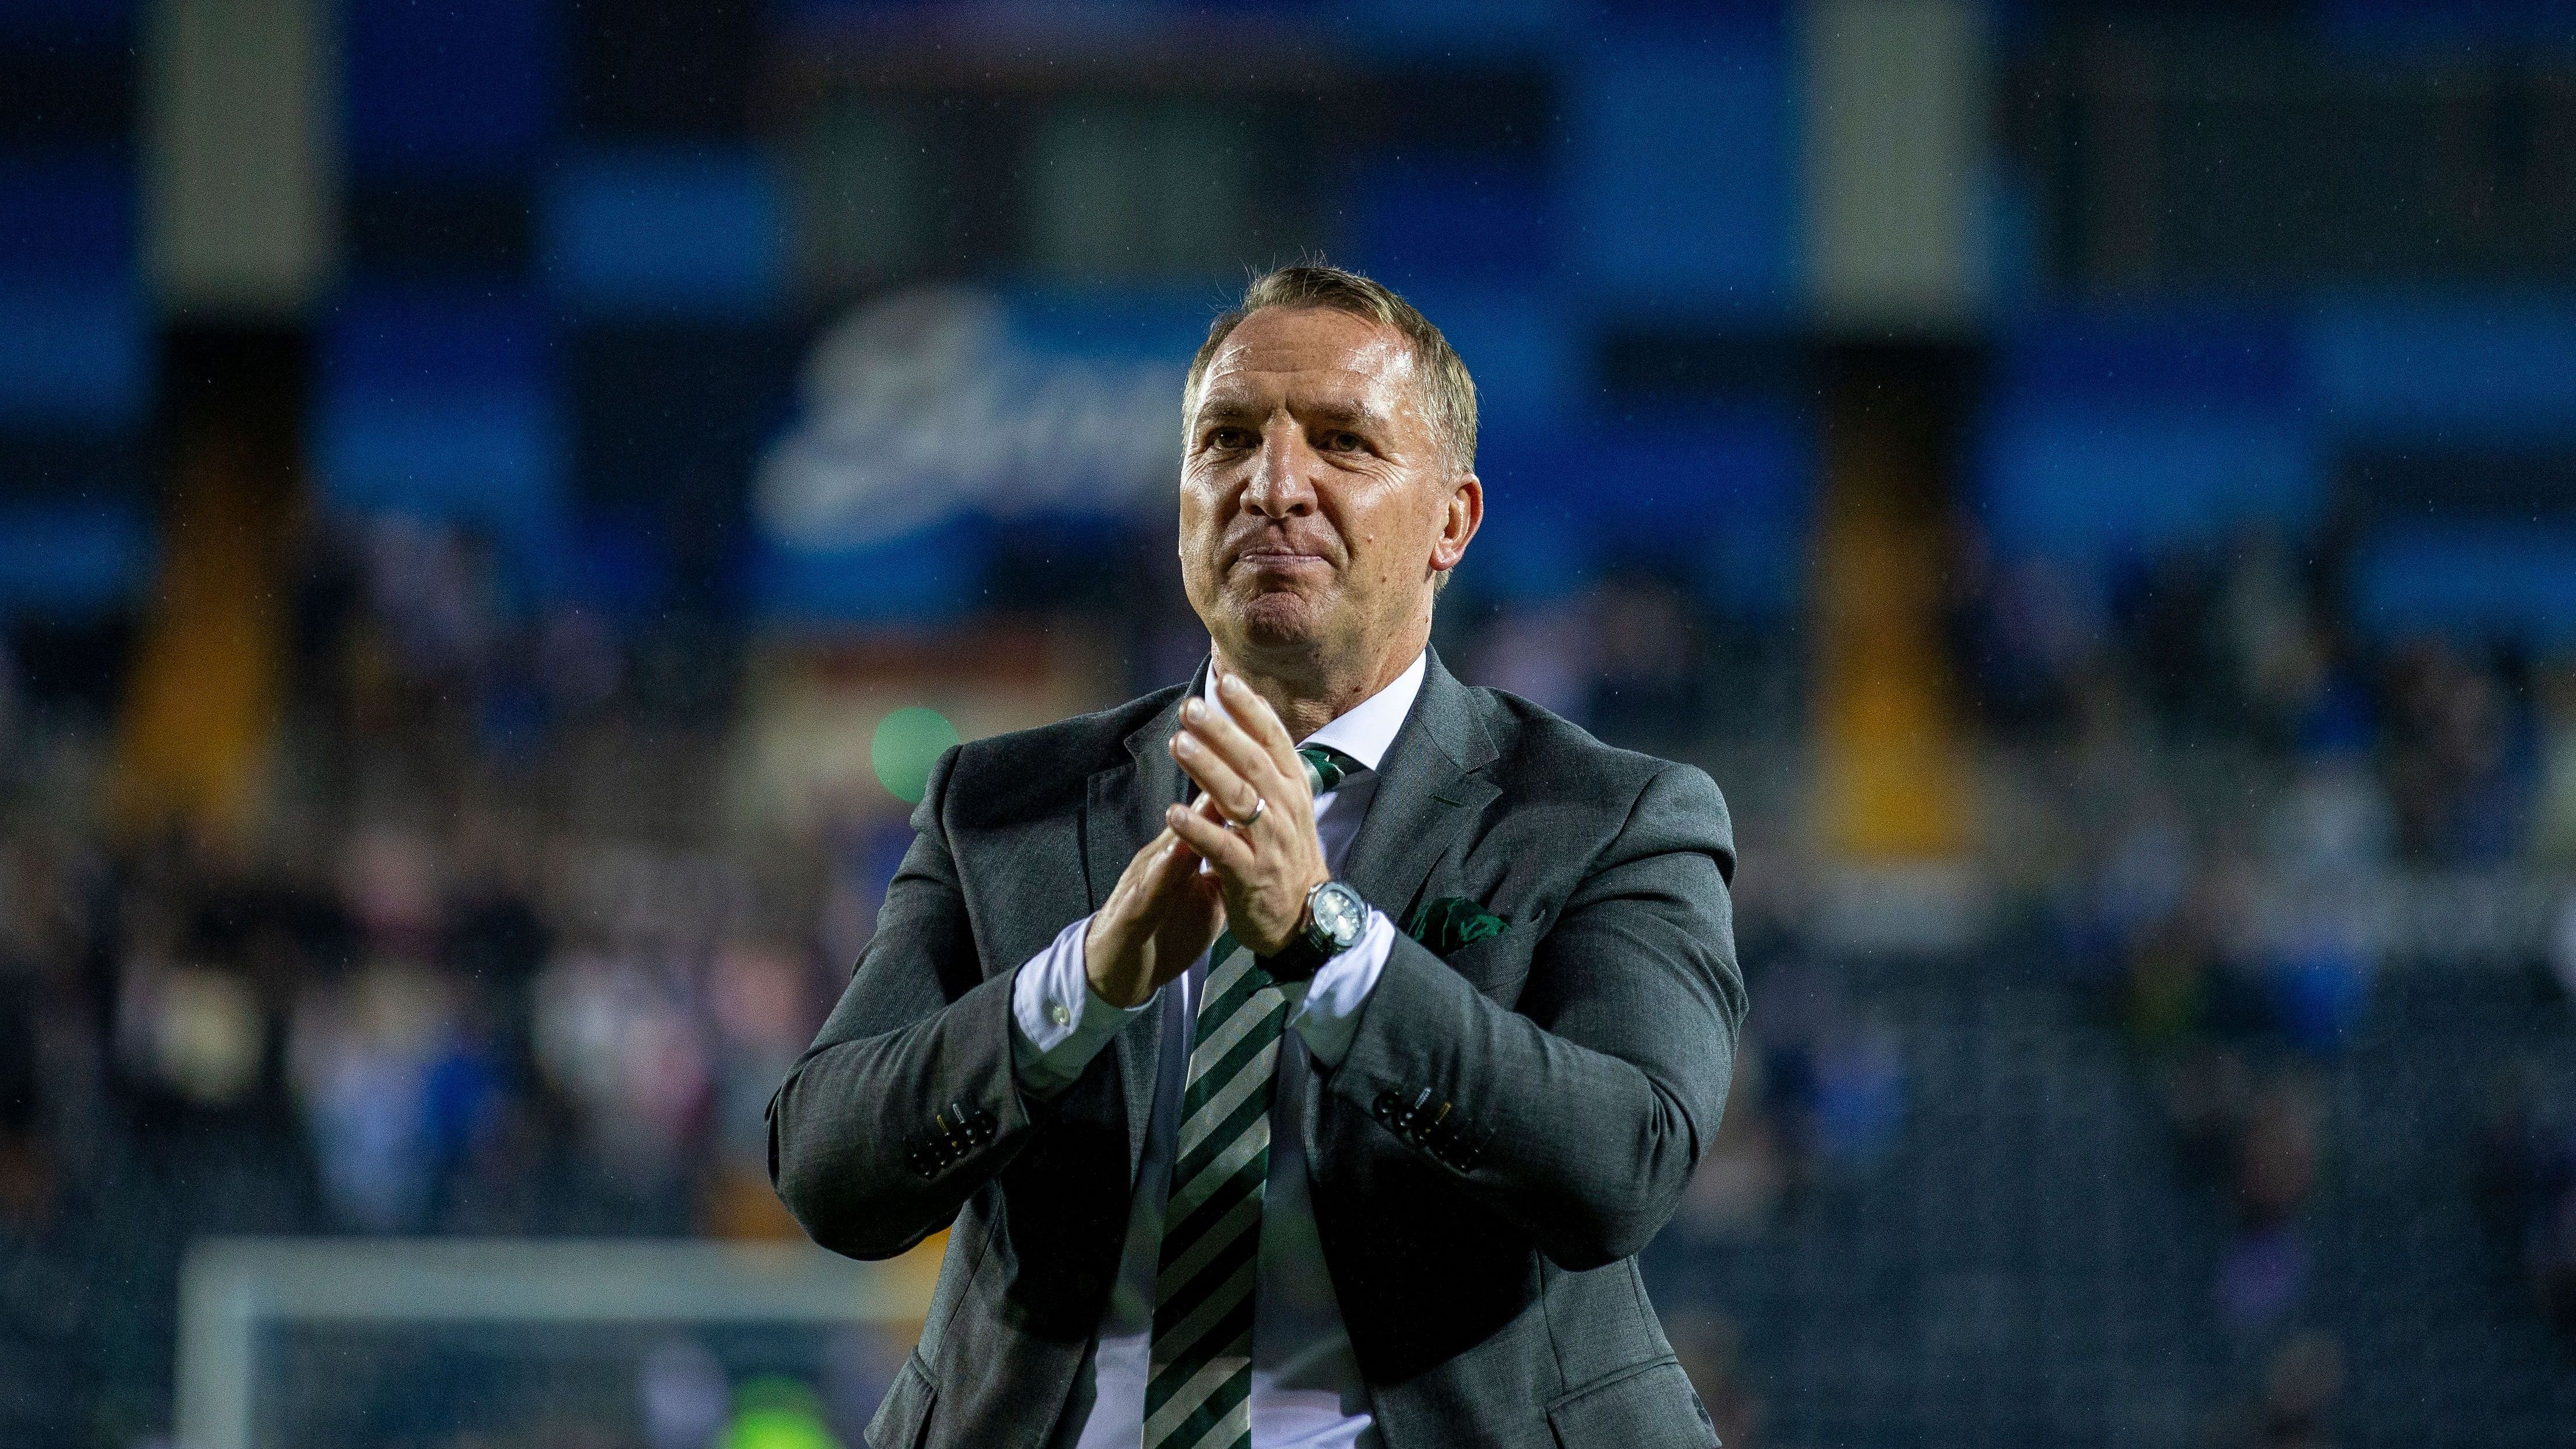 Rodgers won his third Scottish Premiership title at Rugby Park on Wednesday night, after success in 2016-17 and 2017-18 too